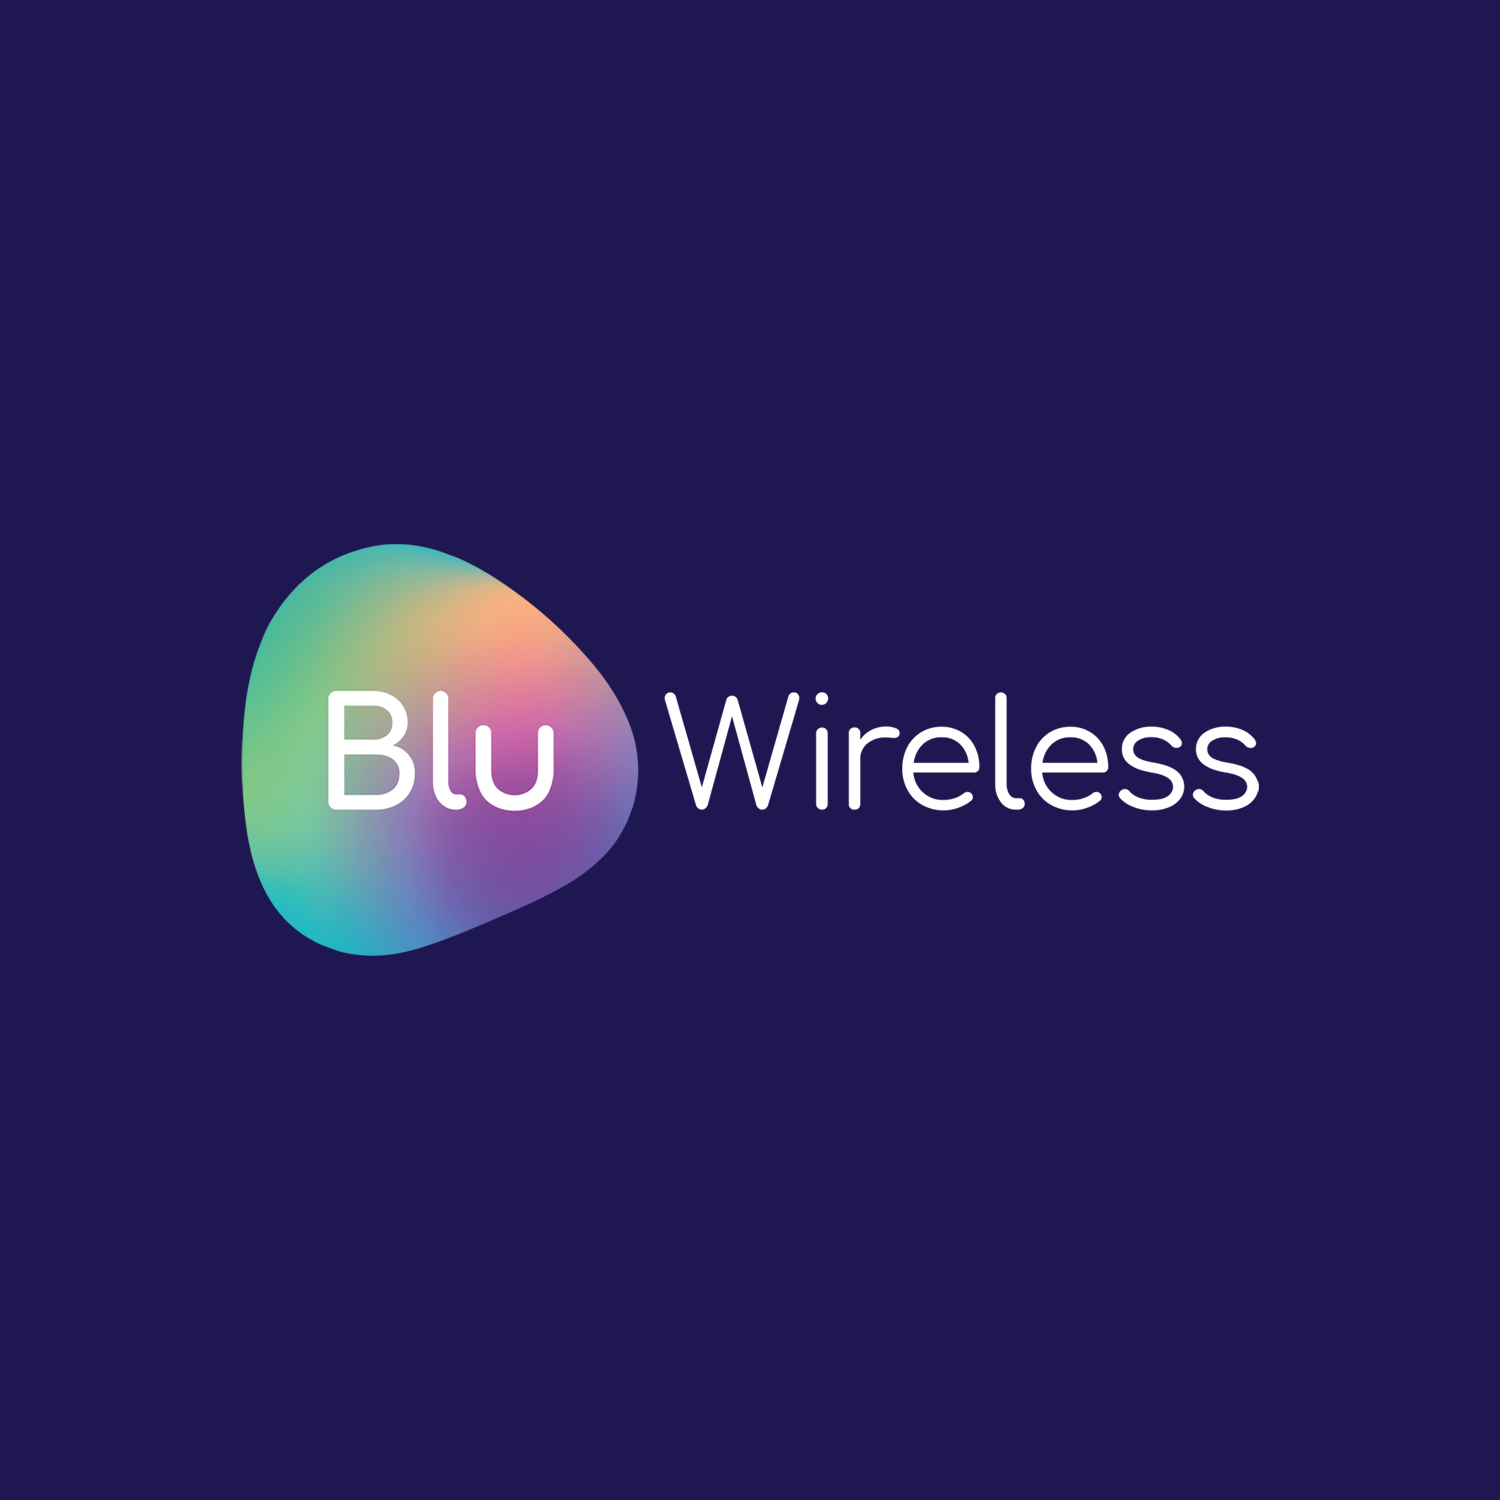 Blu Wireless Successful scale-up journey with 5G connectivity specialist